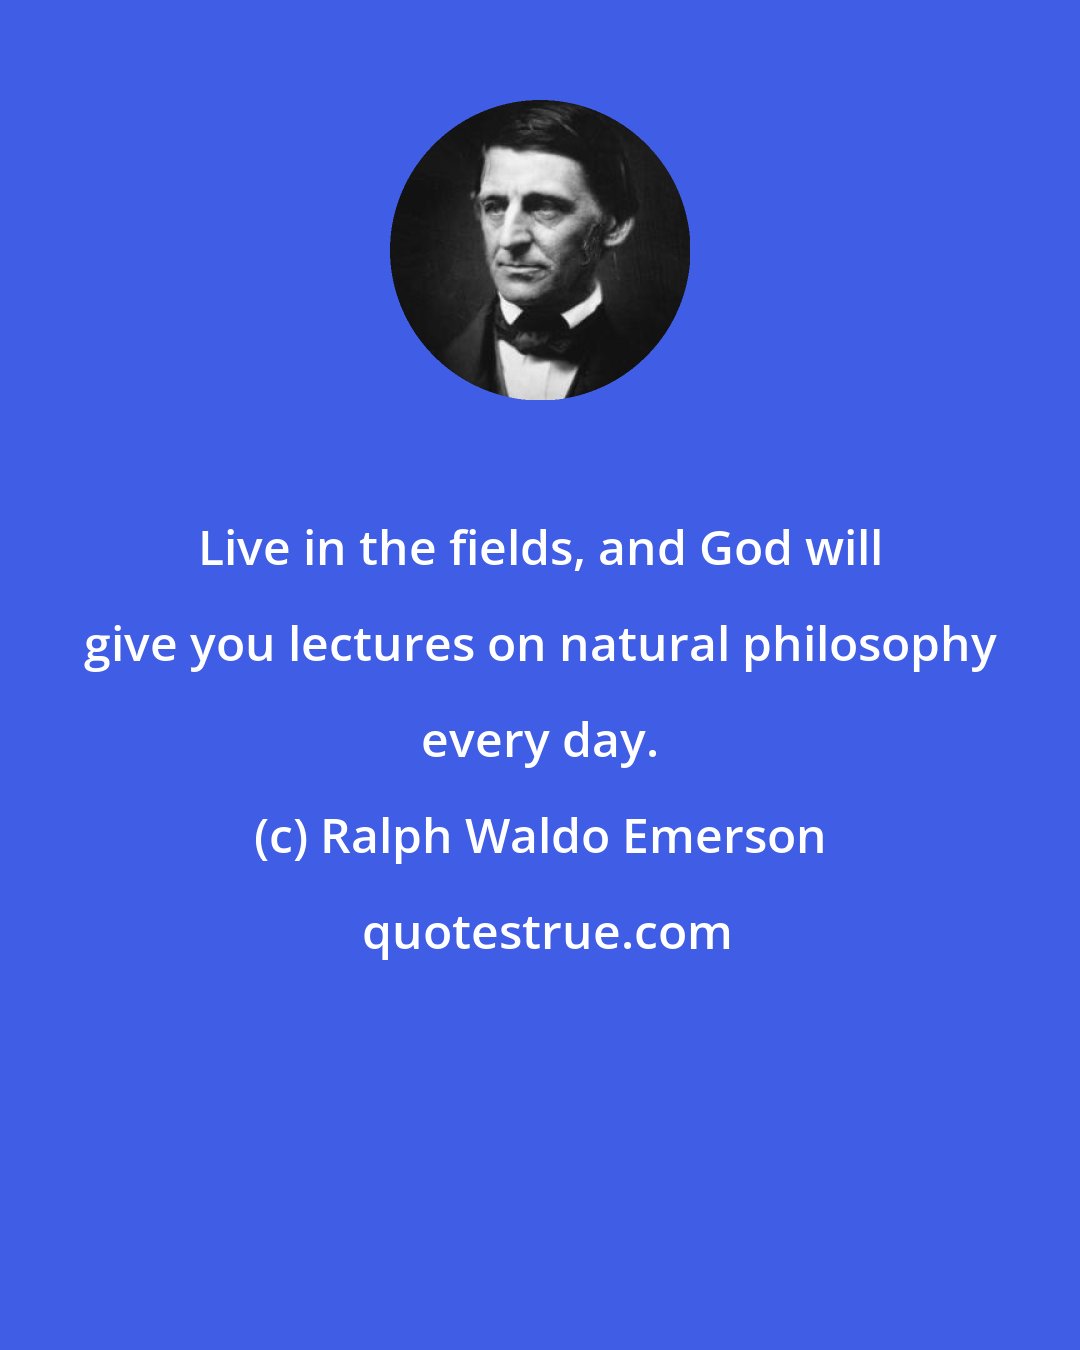 Ralph Waldo Emerson: Live in the fields, and God will give you lectures on natural philosophy every day.